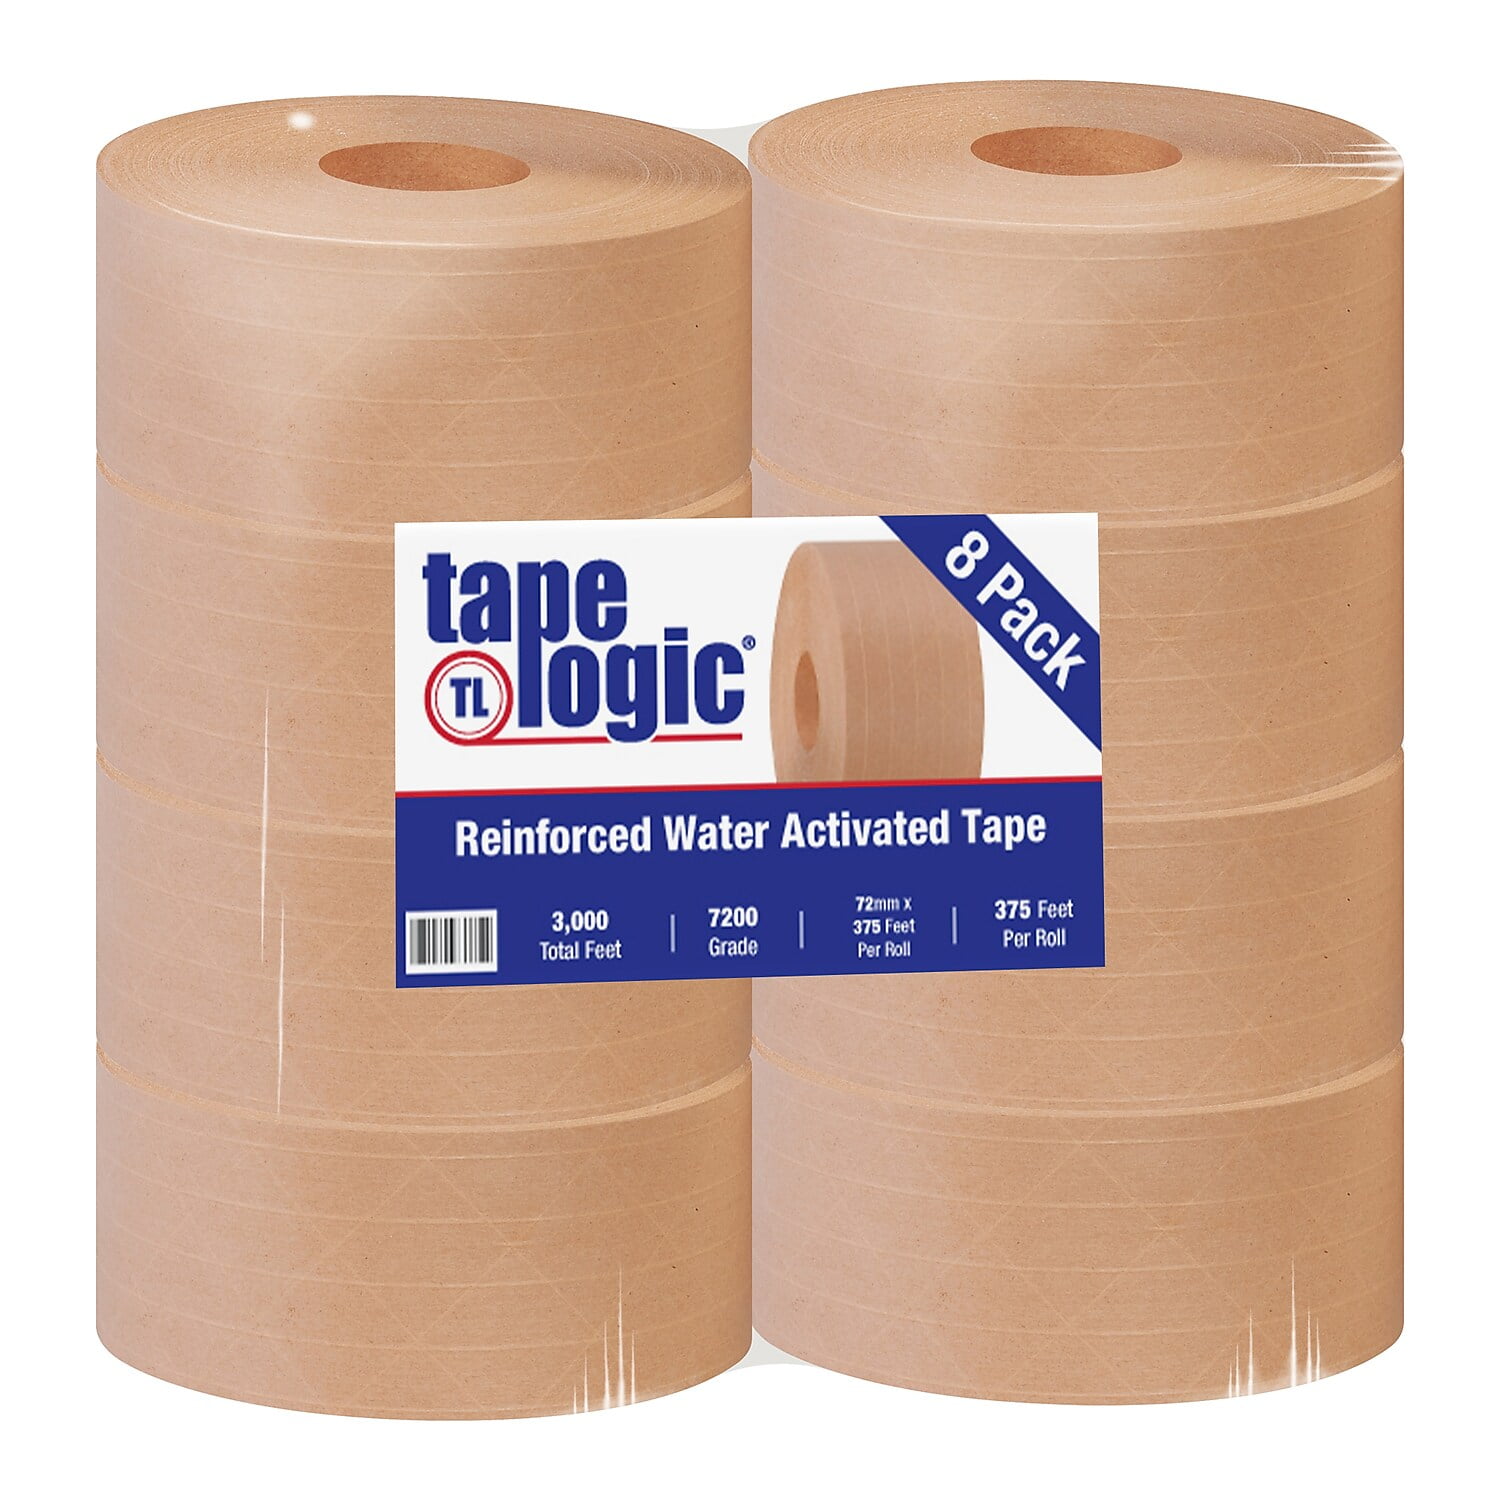 Tape Logic T9067200 72 Mm X 375 Ft. Kraft No.7200 Reinforced Water Activated Tape, Kraft - Case Of 8